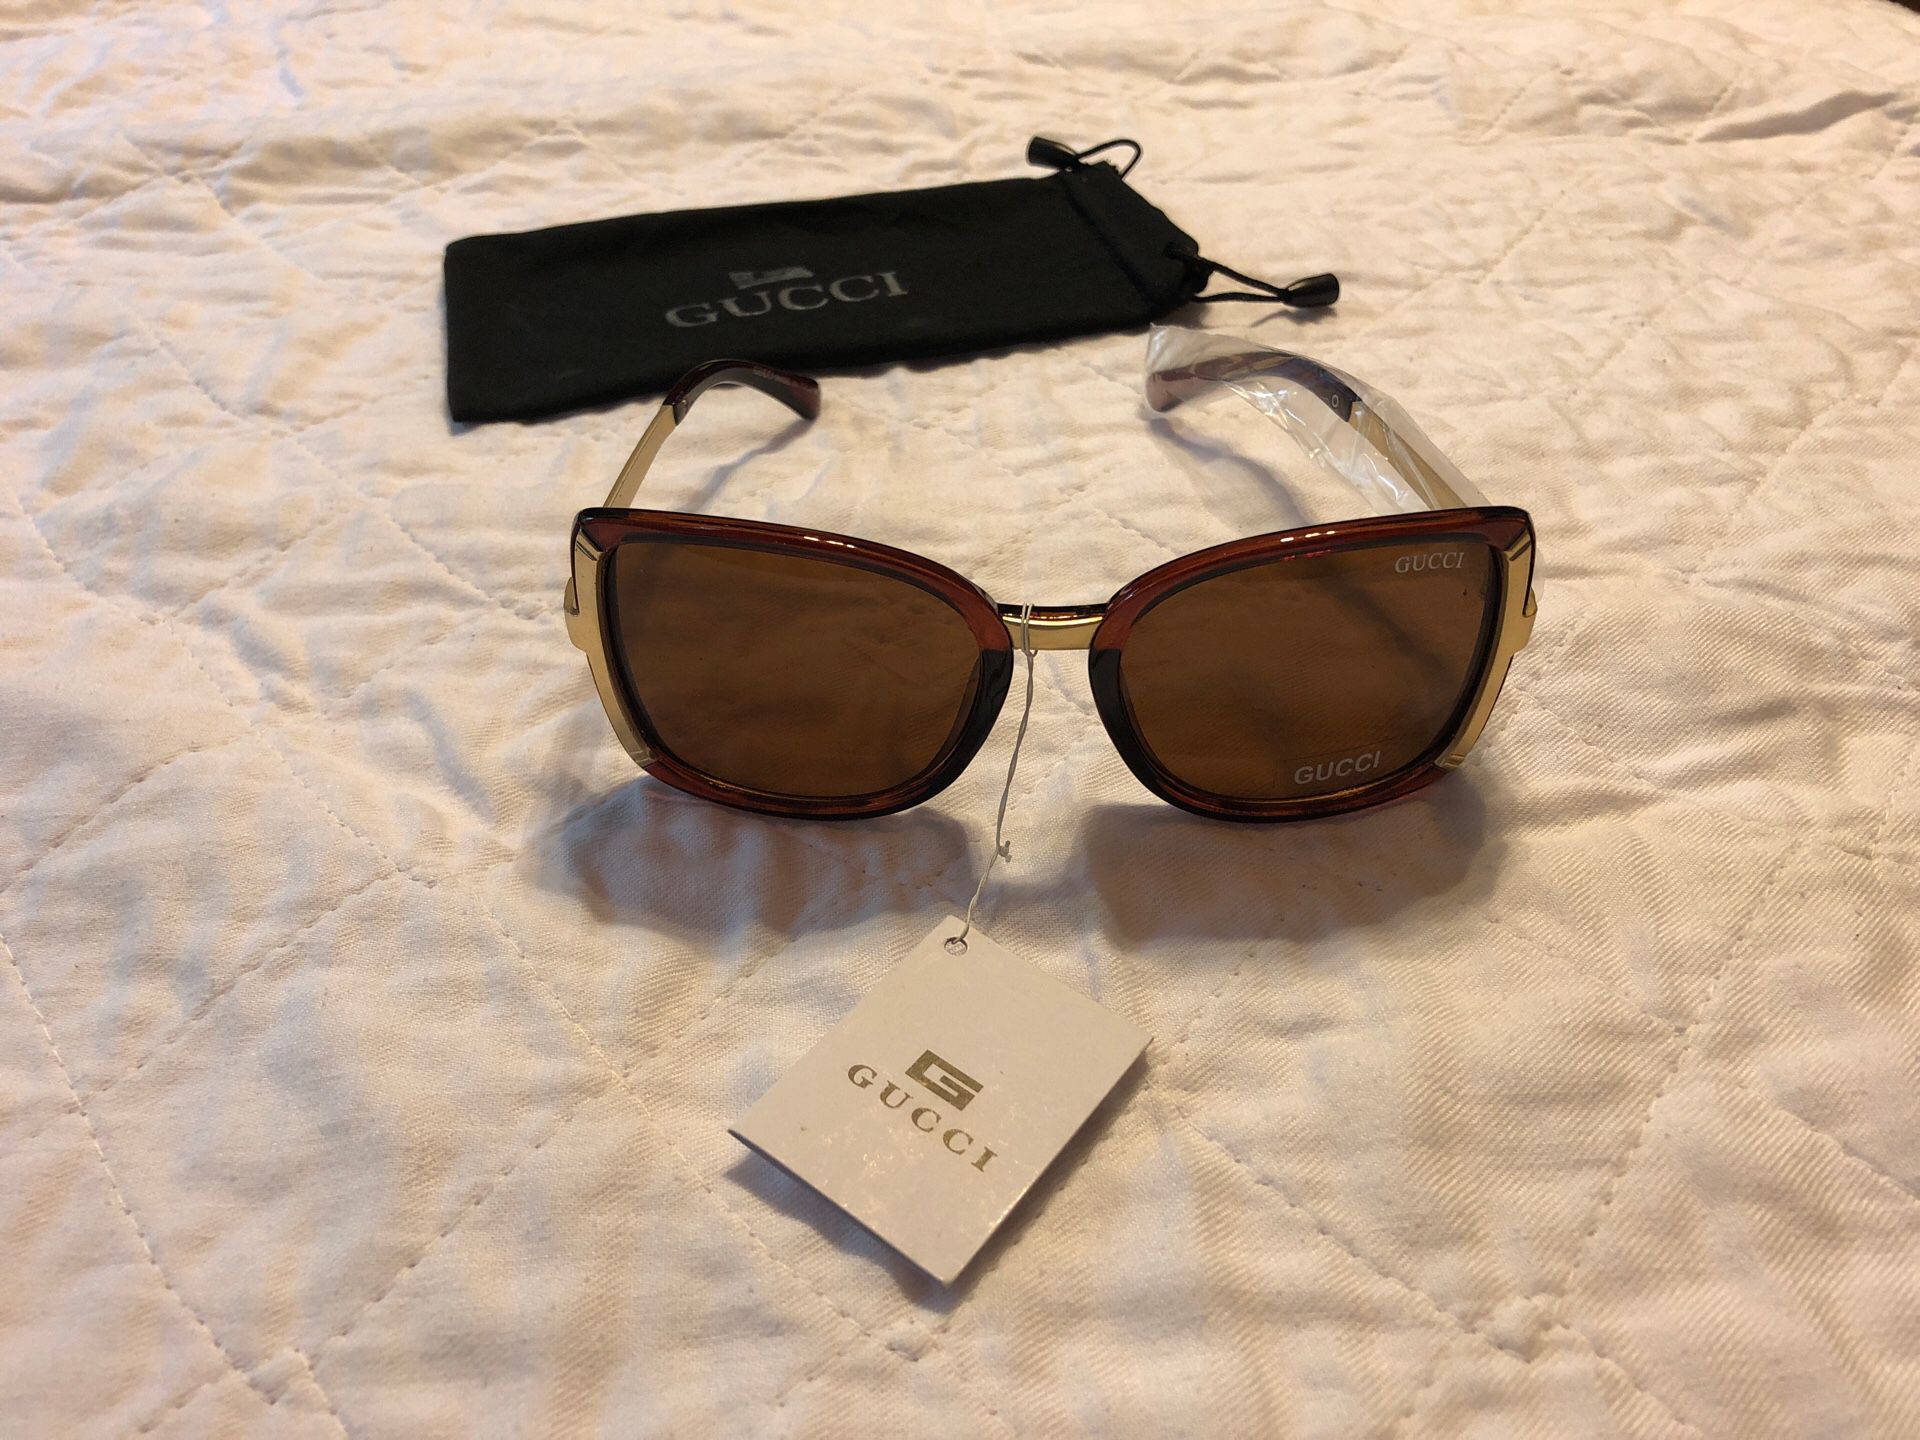 Women’s Sunglasses, Gucci, Brand New with tags